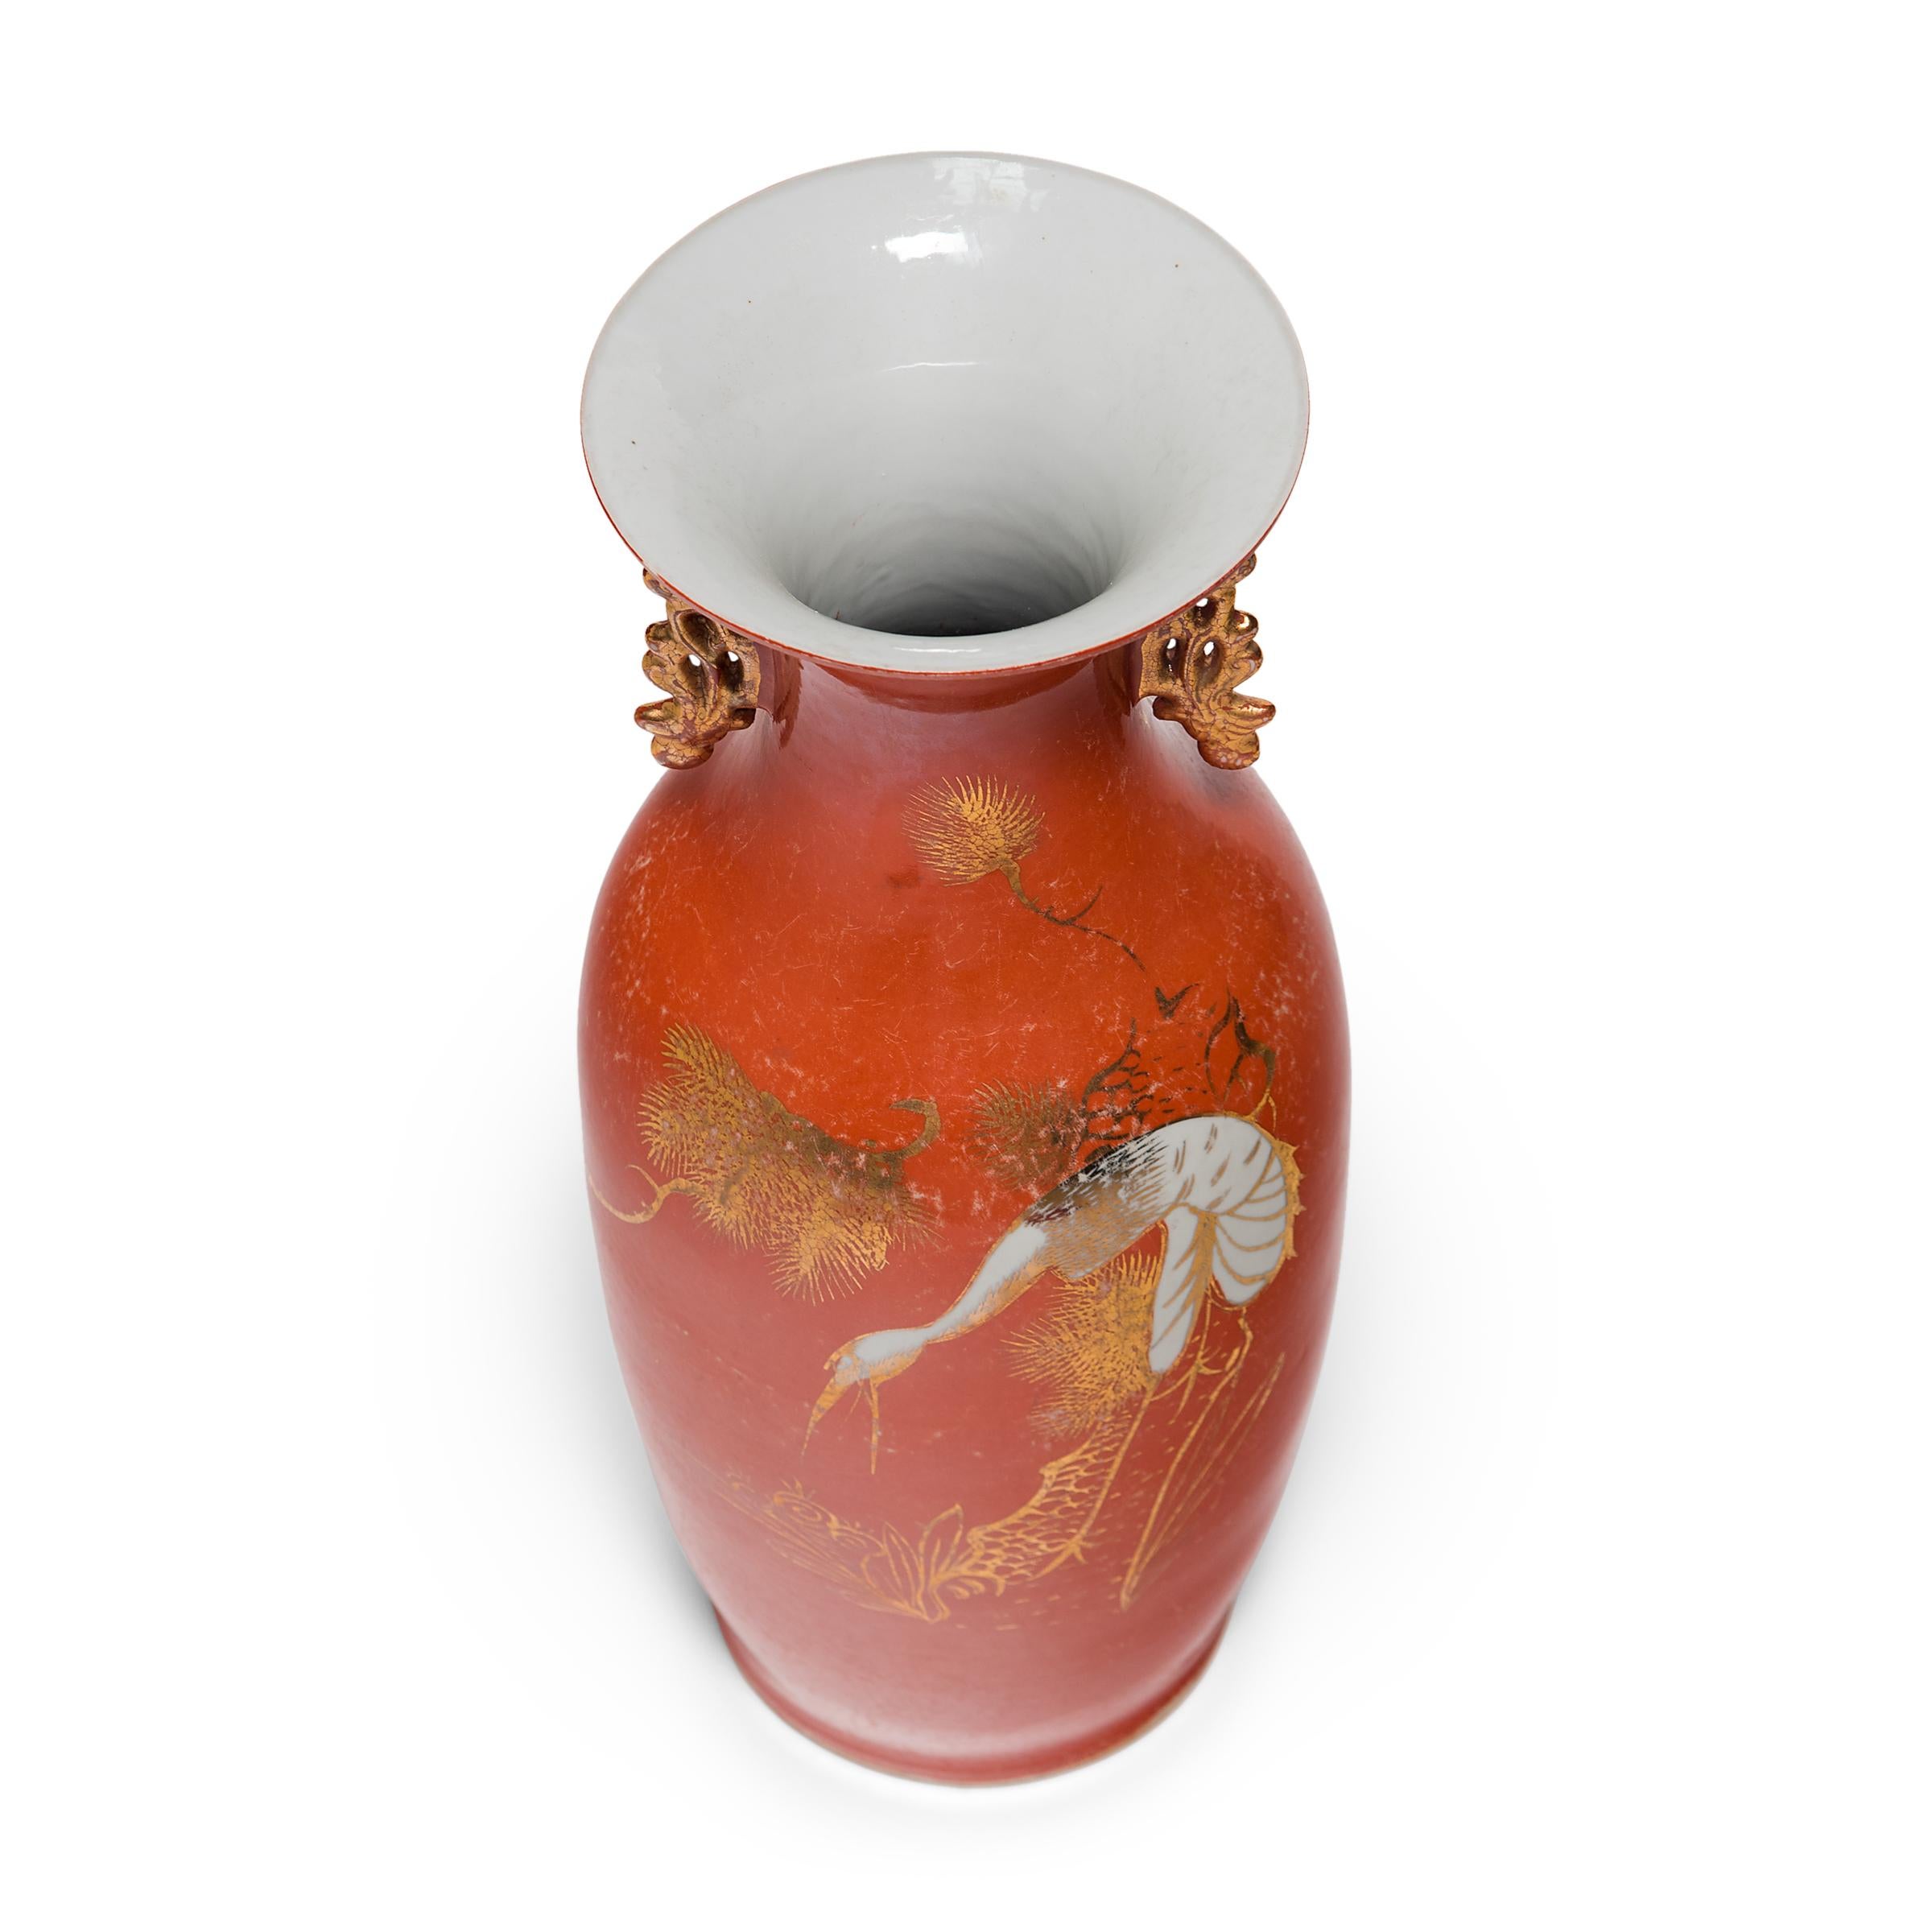 Early 20th Century Chinese Art Deco Persimmon Vase with White Cranes, circa 1920s For Sale